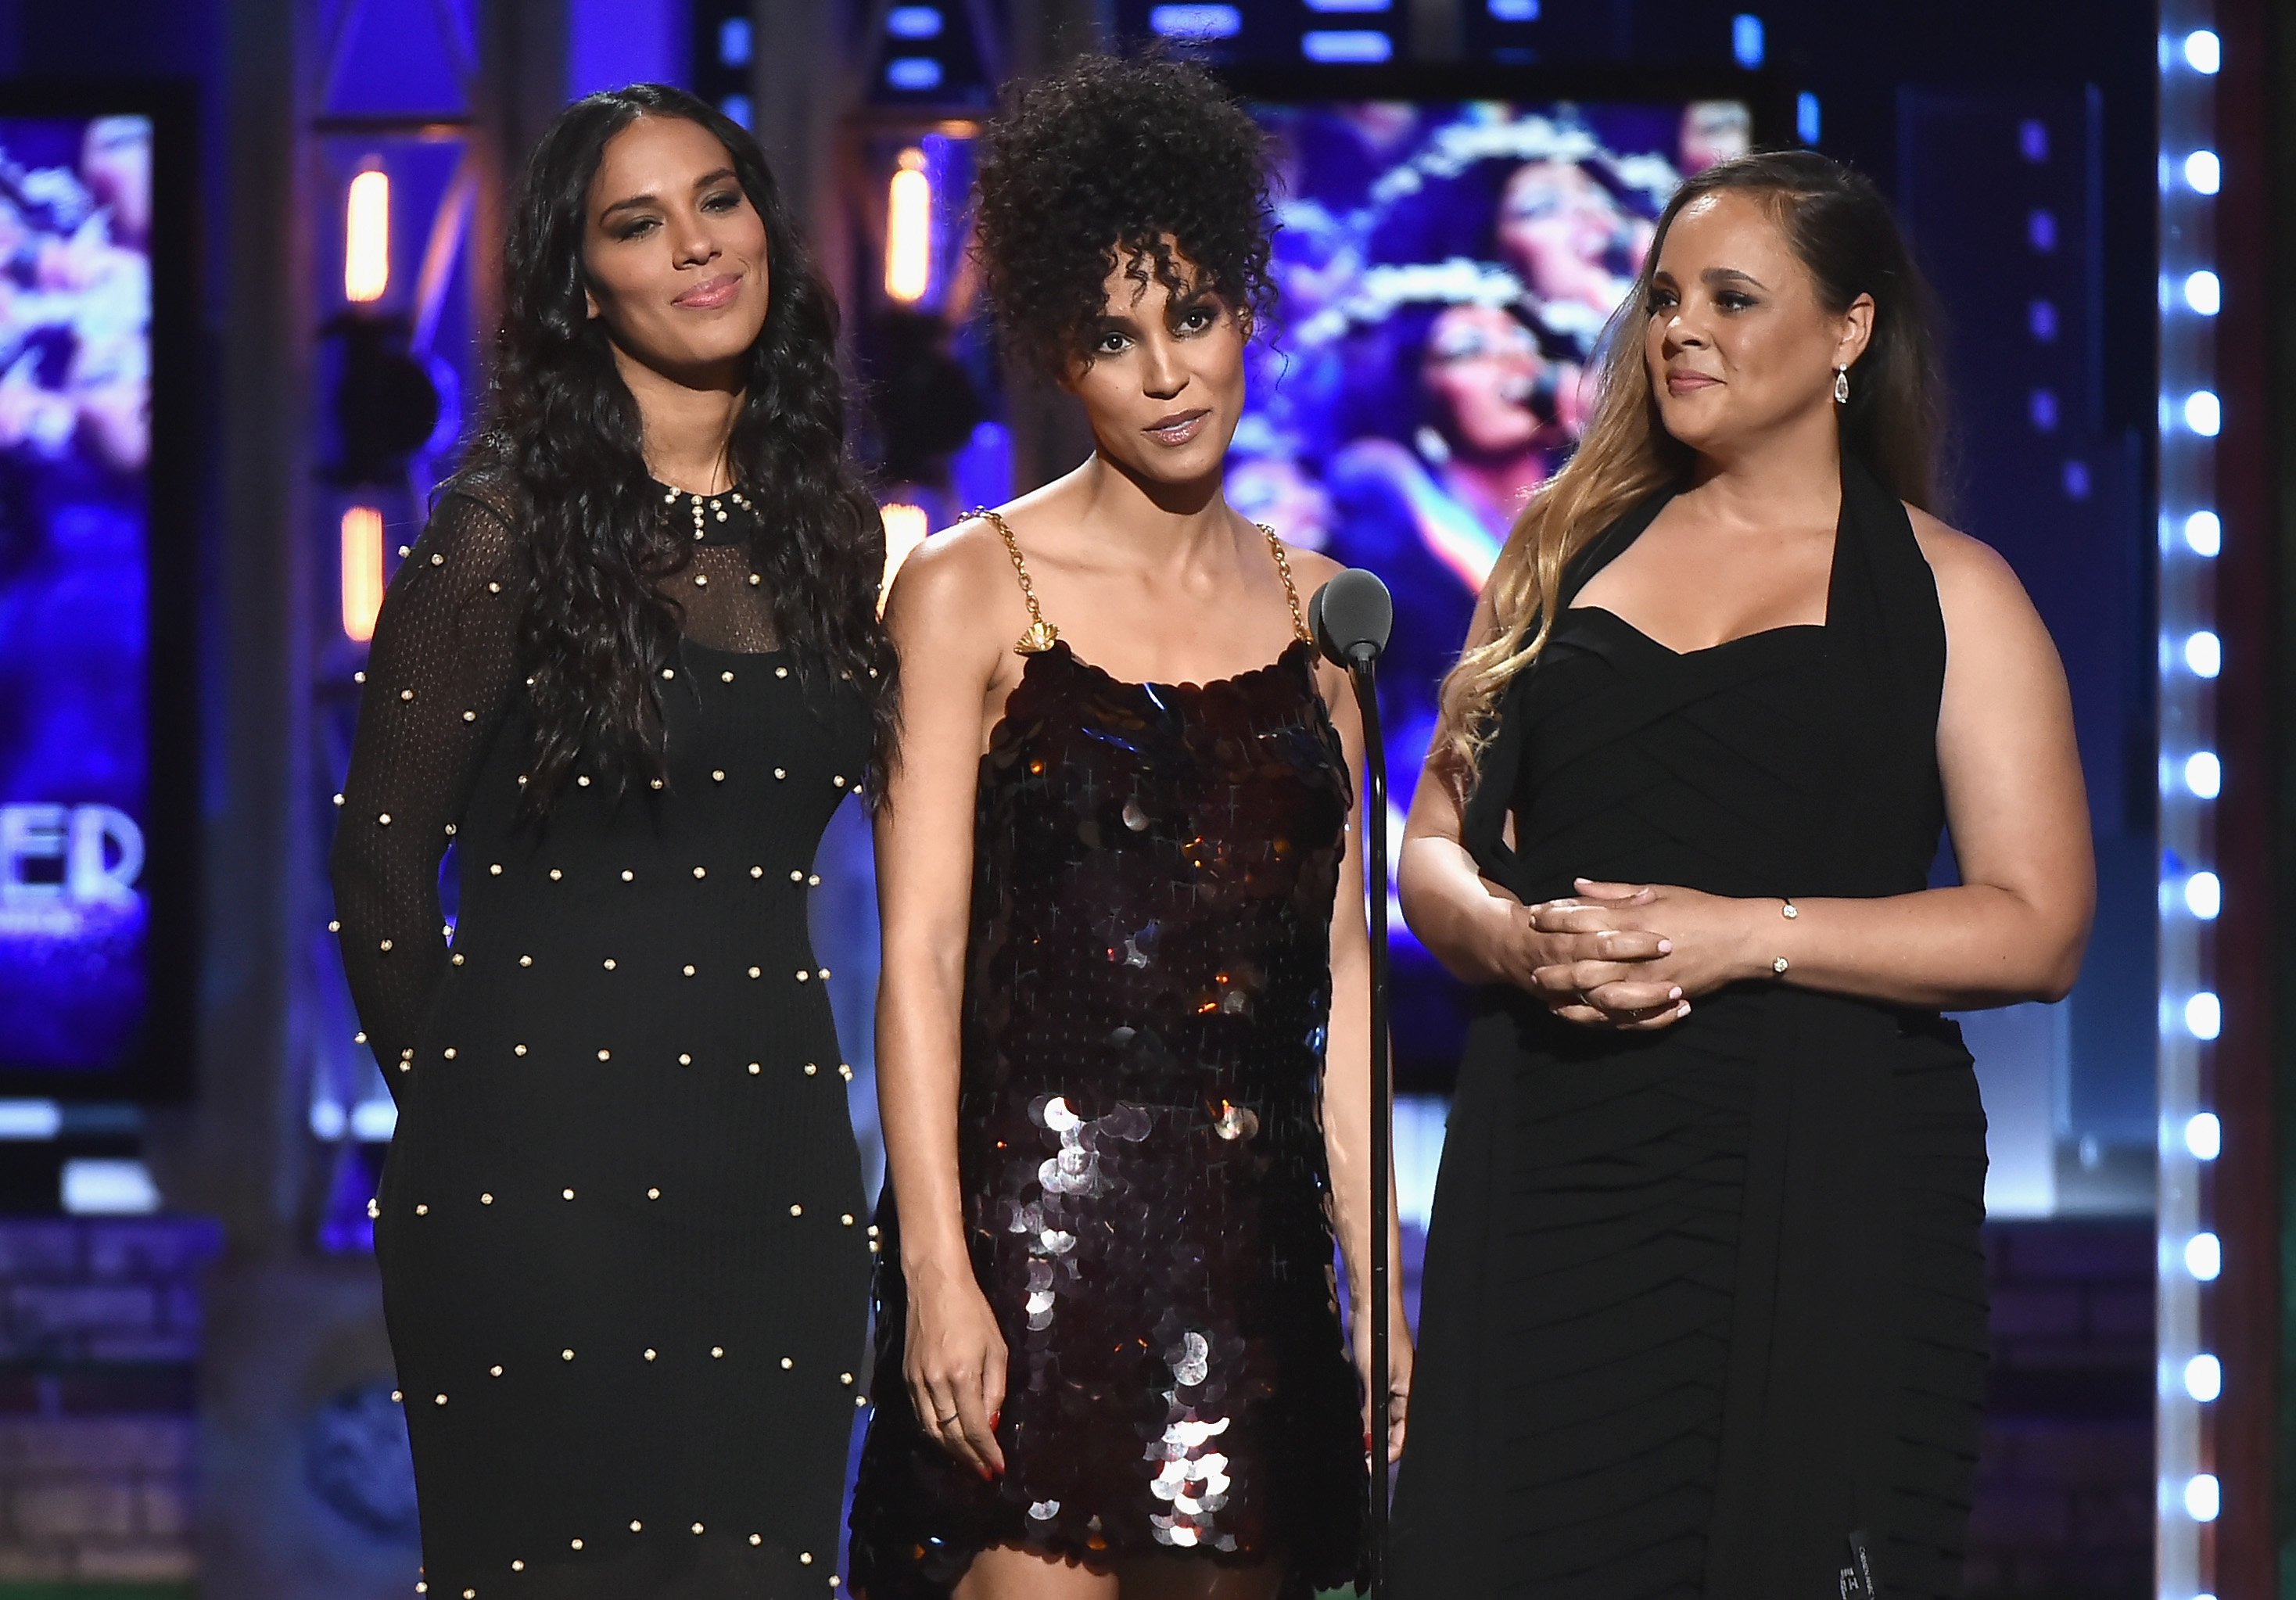 Brooklyn Sudano, Amanda Sudano and Mimi Summer attend the 72nd Annual Tony Awards at Radio City Music Hall on June 10, 2018. | Photo: GettyImages